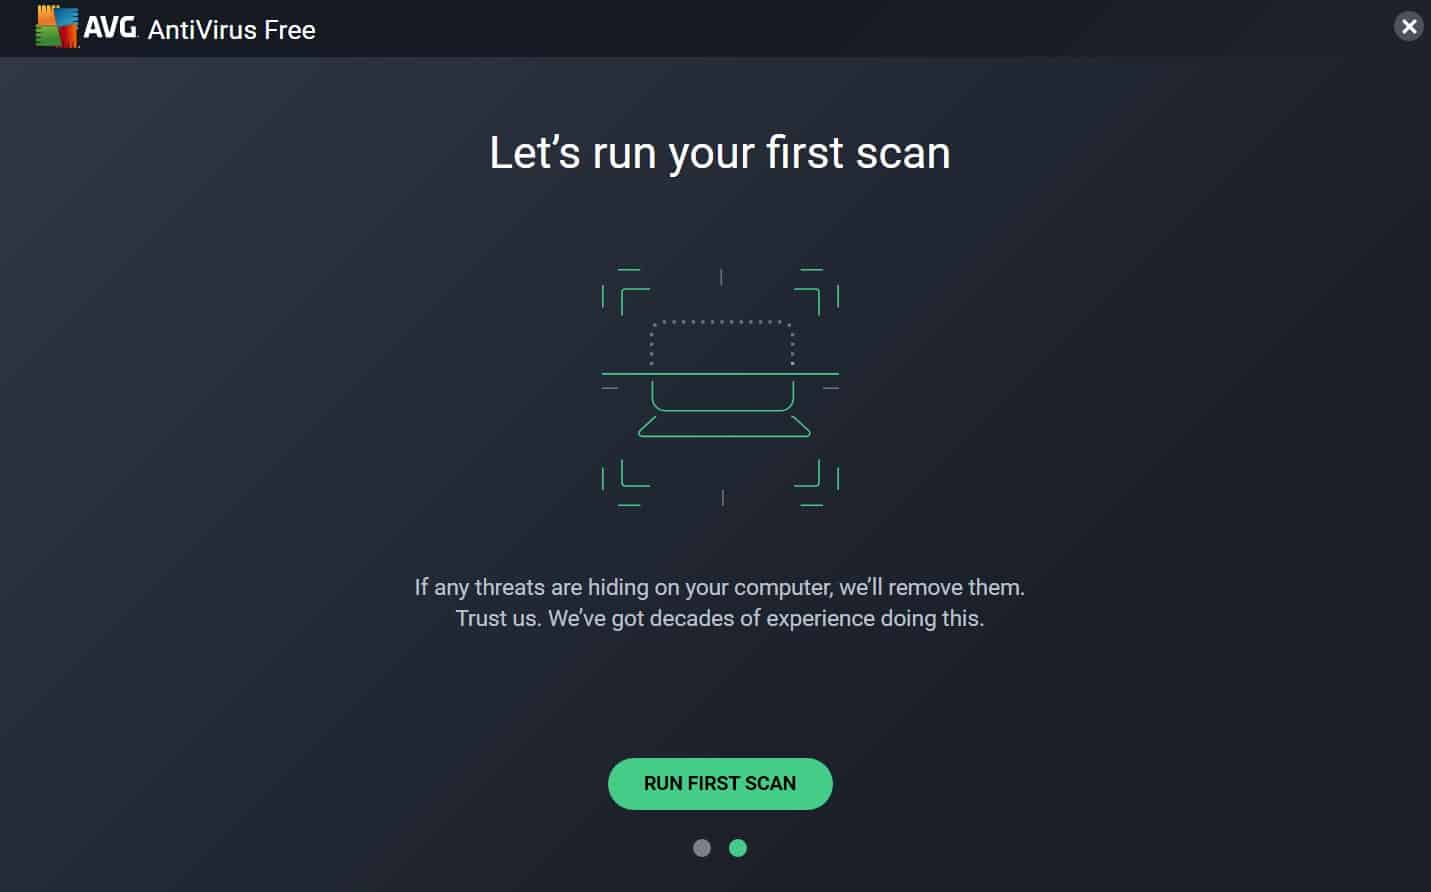 Run a full system scan with an updated antivirus software
If malware is detected, follow the recommended steps to remove it